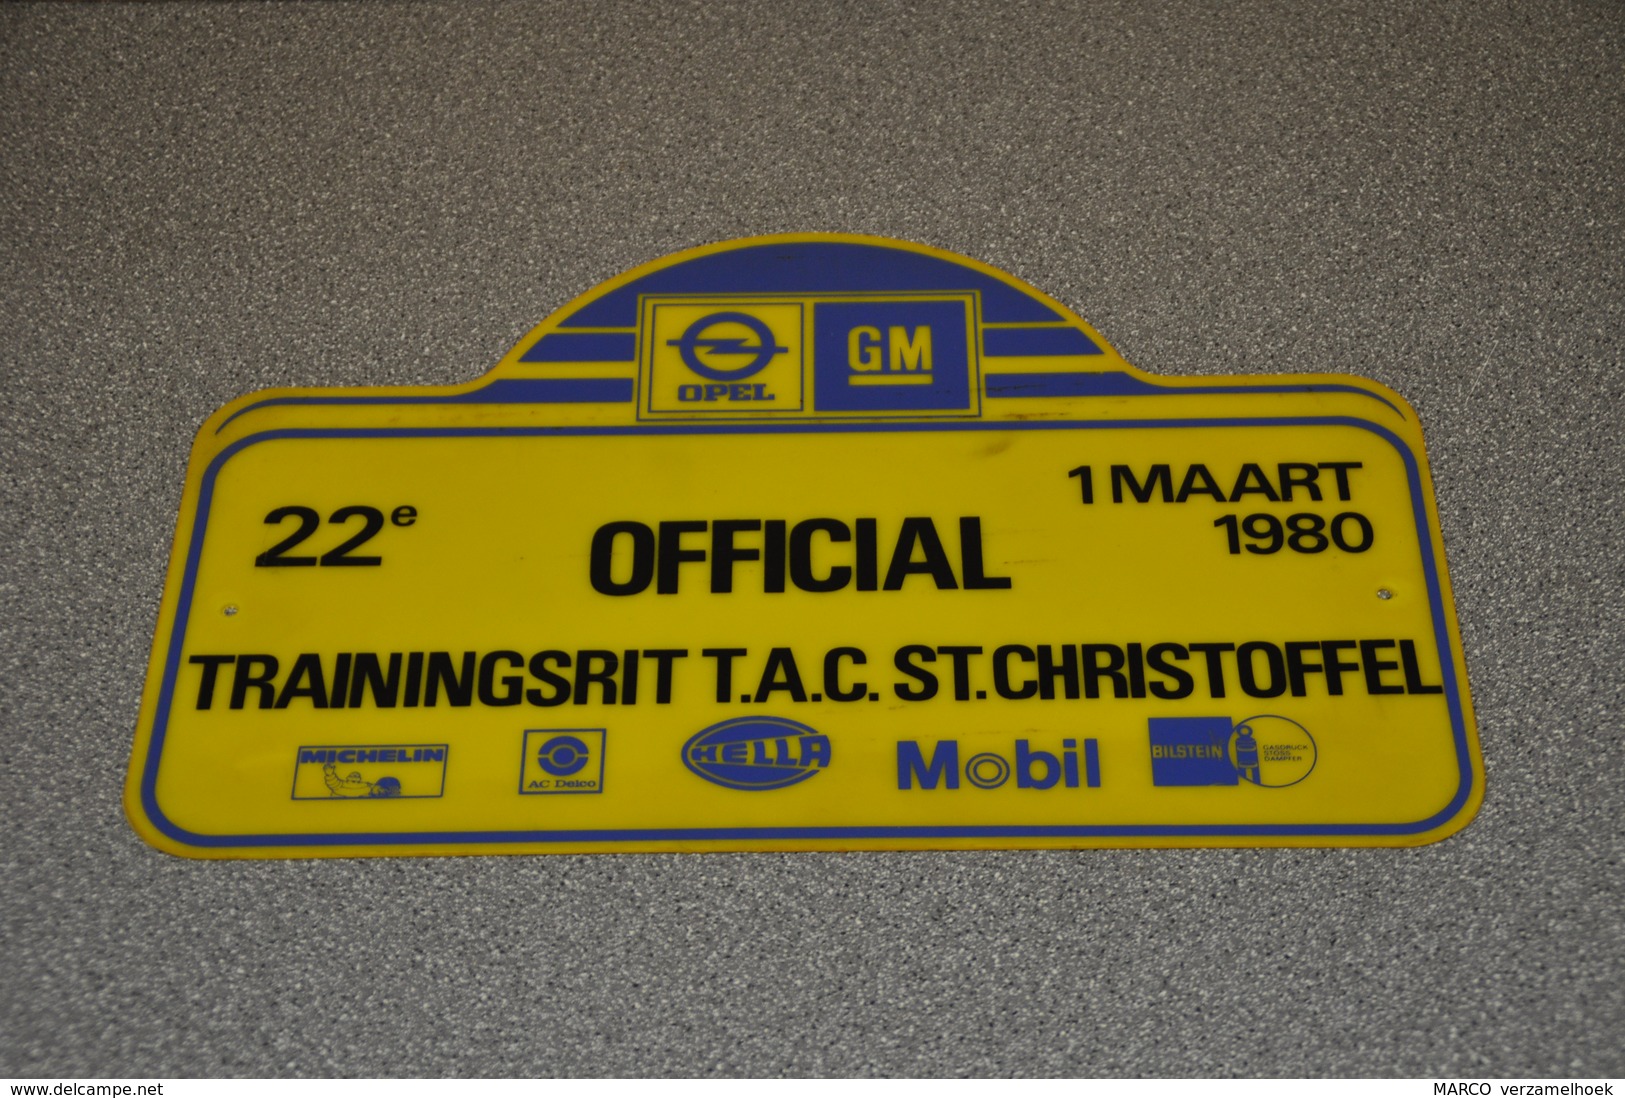 Rally Plaat-rallye Plaque Plastic: Trainingsrit Tilburgse Automobielclub 1980 OFFICIAL Opel-GM General Motors - Rally-affiches